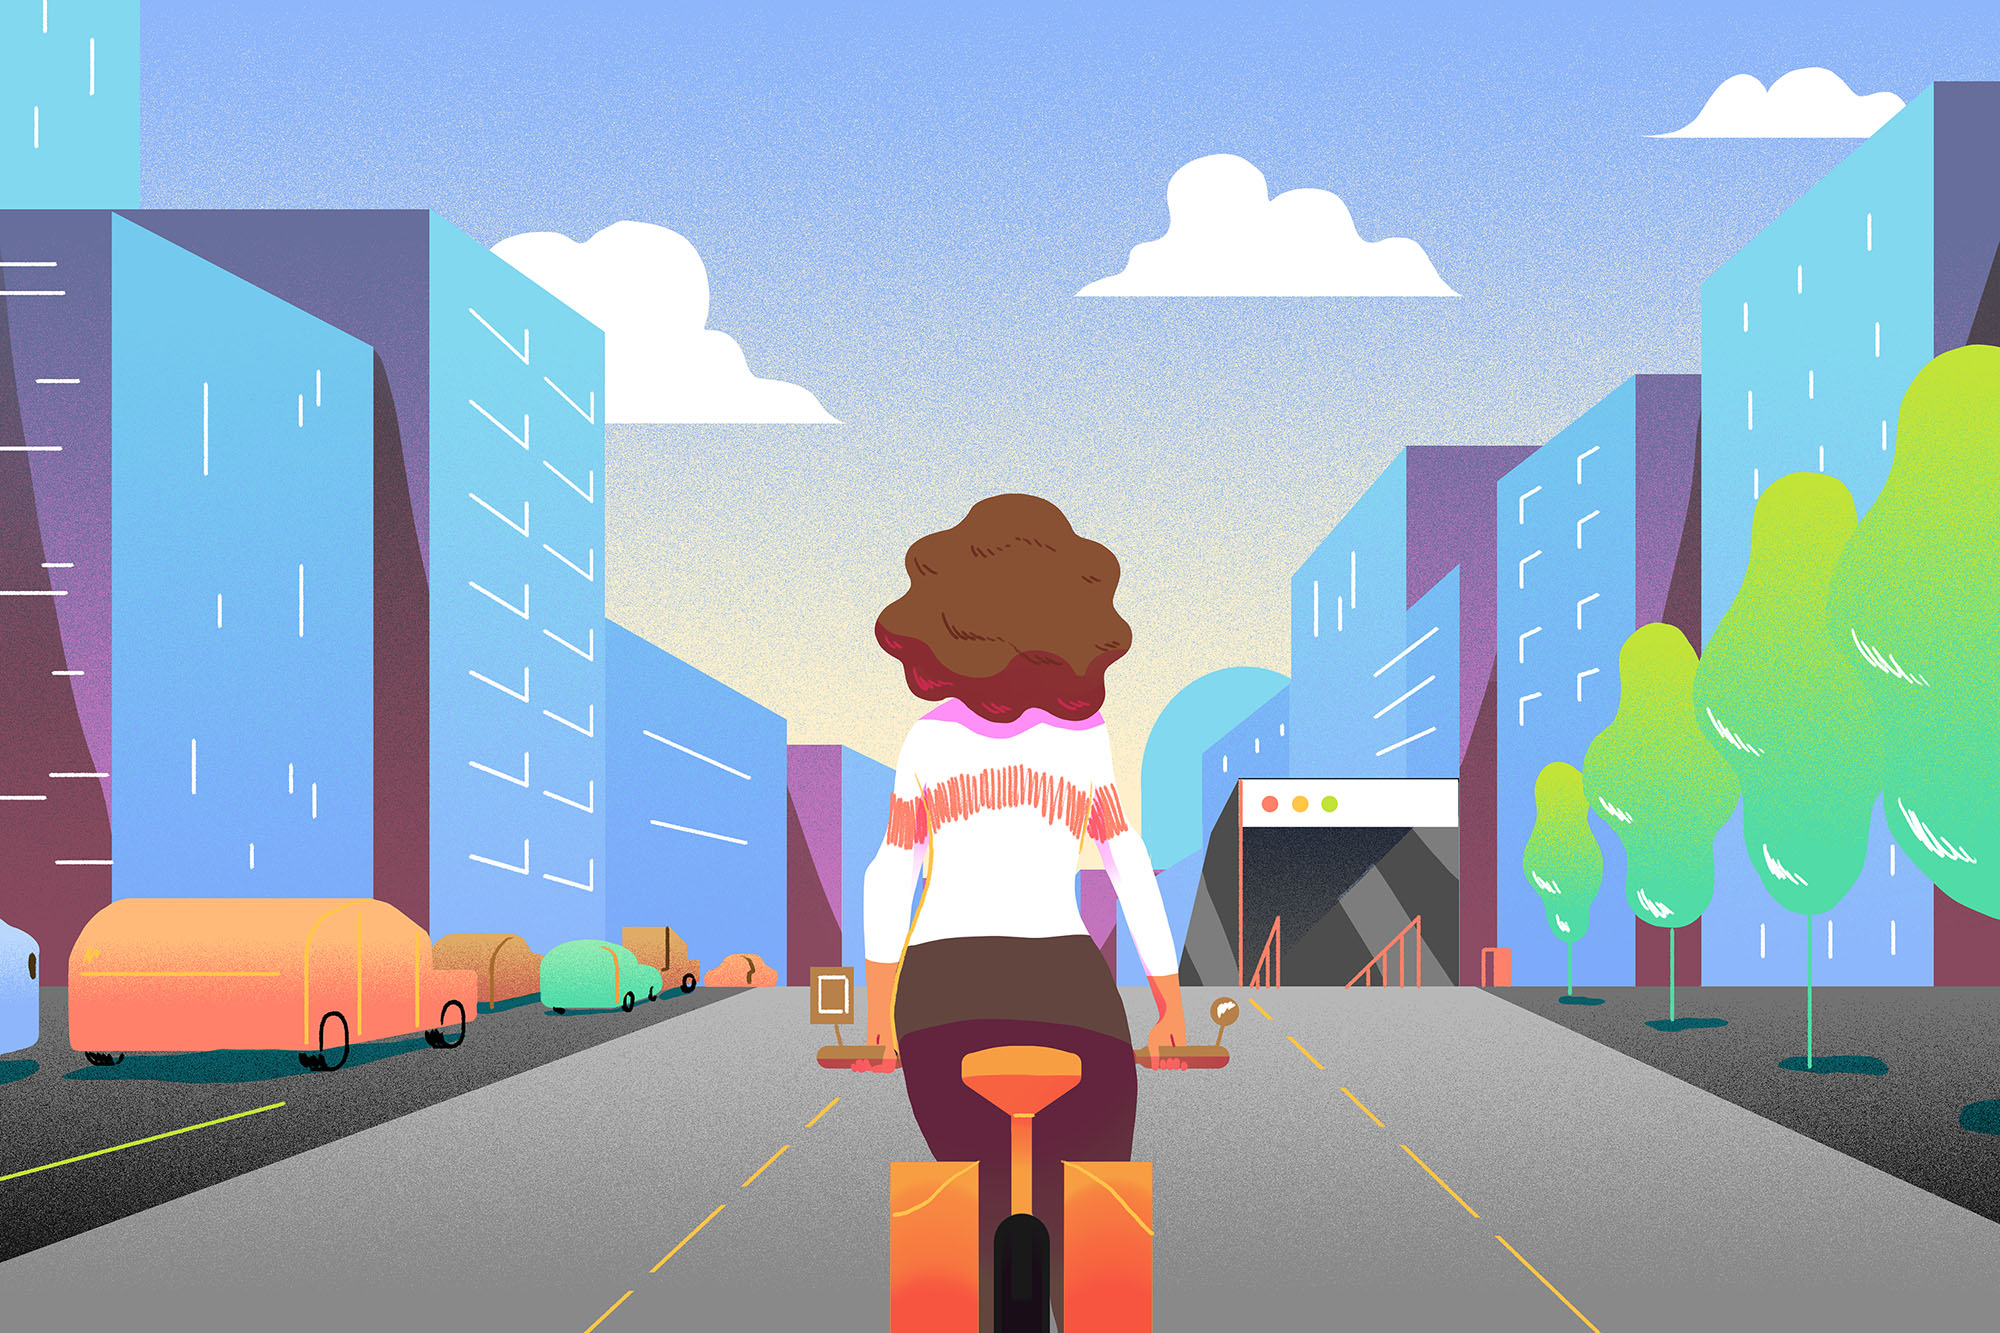 … and then a bike to get home with groceries. With her pick of rovers she could comfortably travel over longer distances than she could comfortably walk or bike. Aya’s newfound range gave her car-free access to cheaper, newer homes in outlying areas.